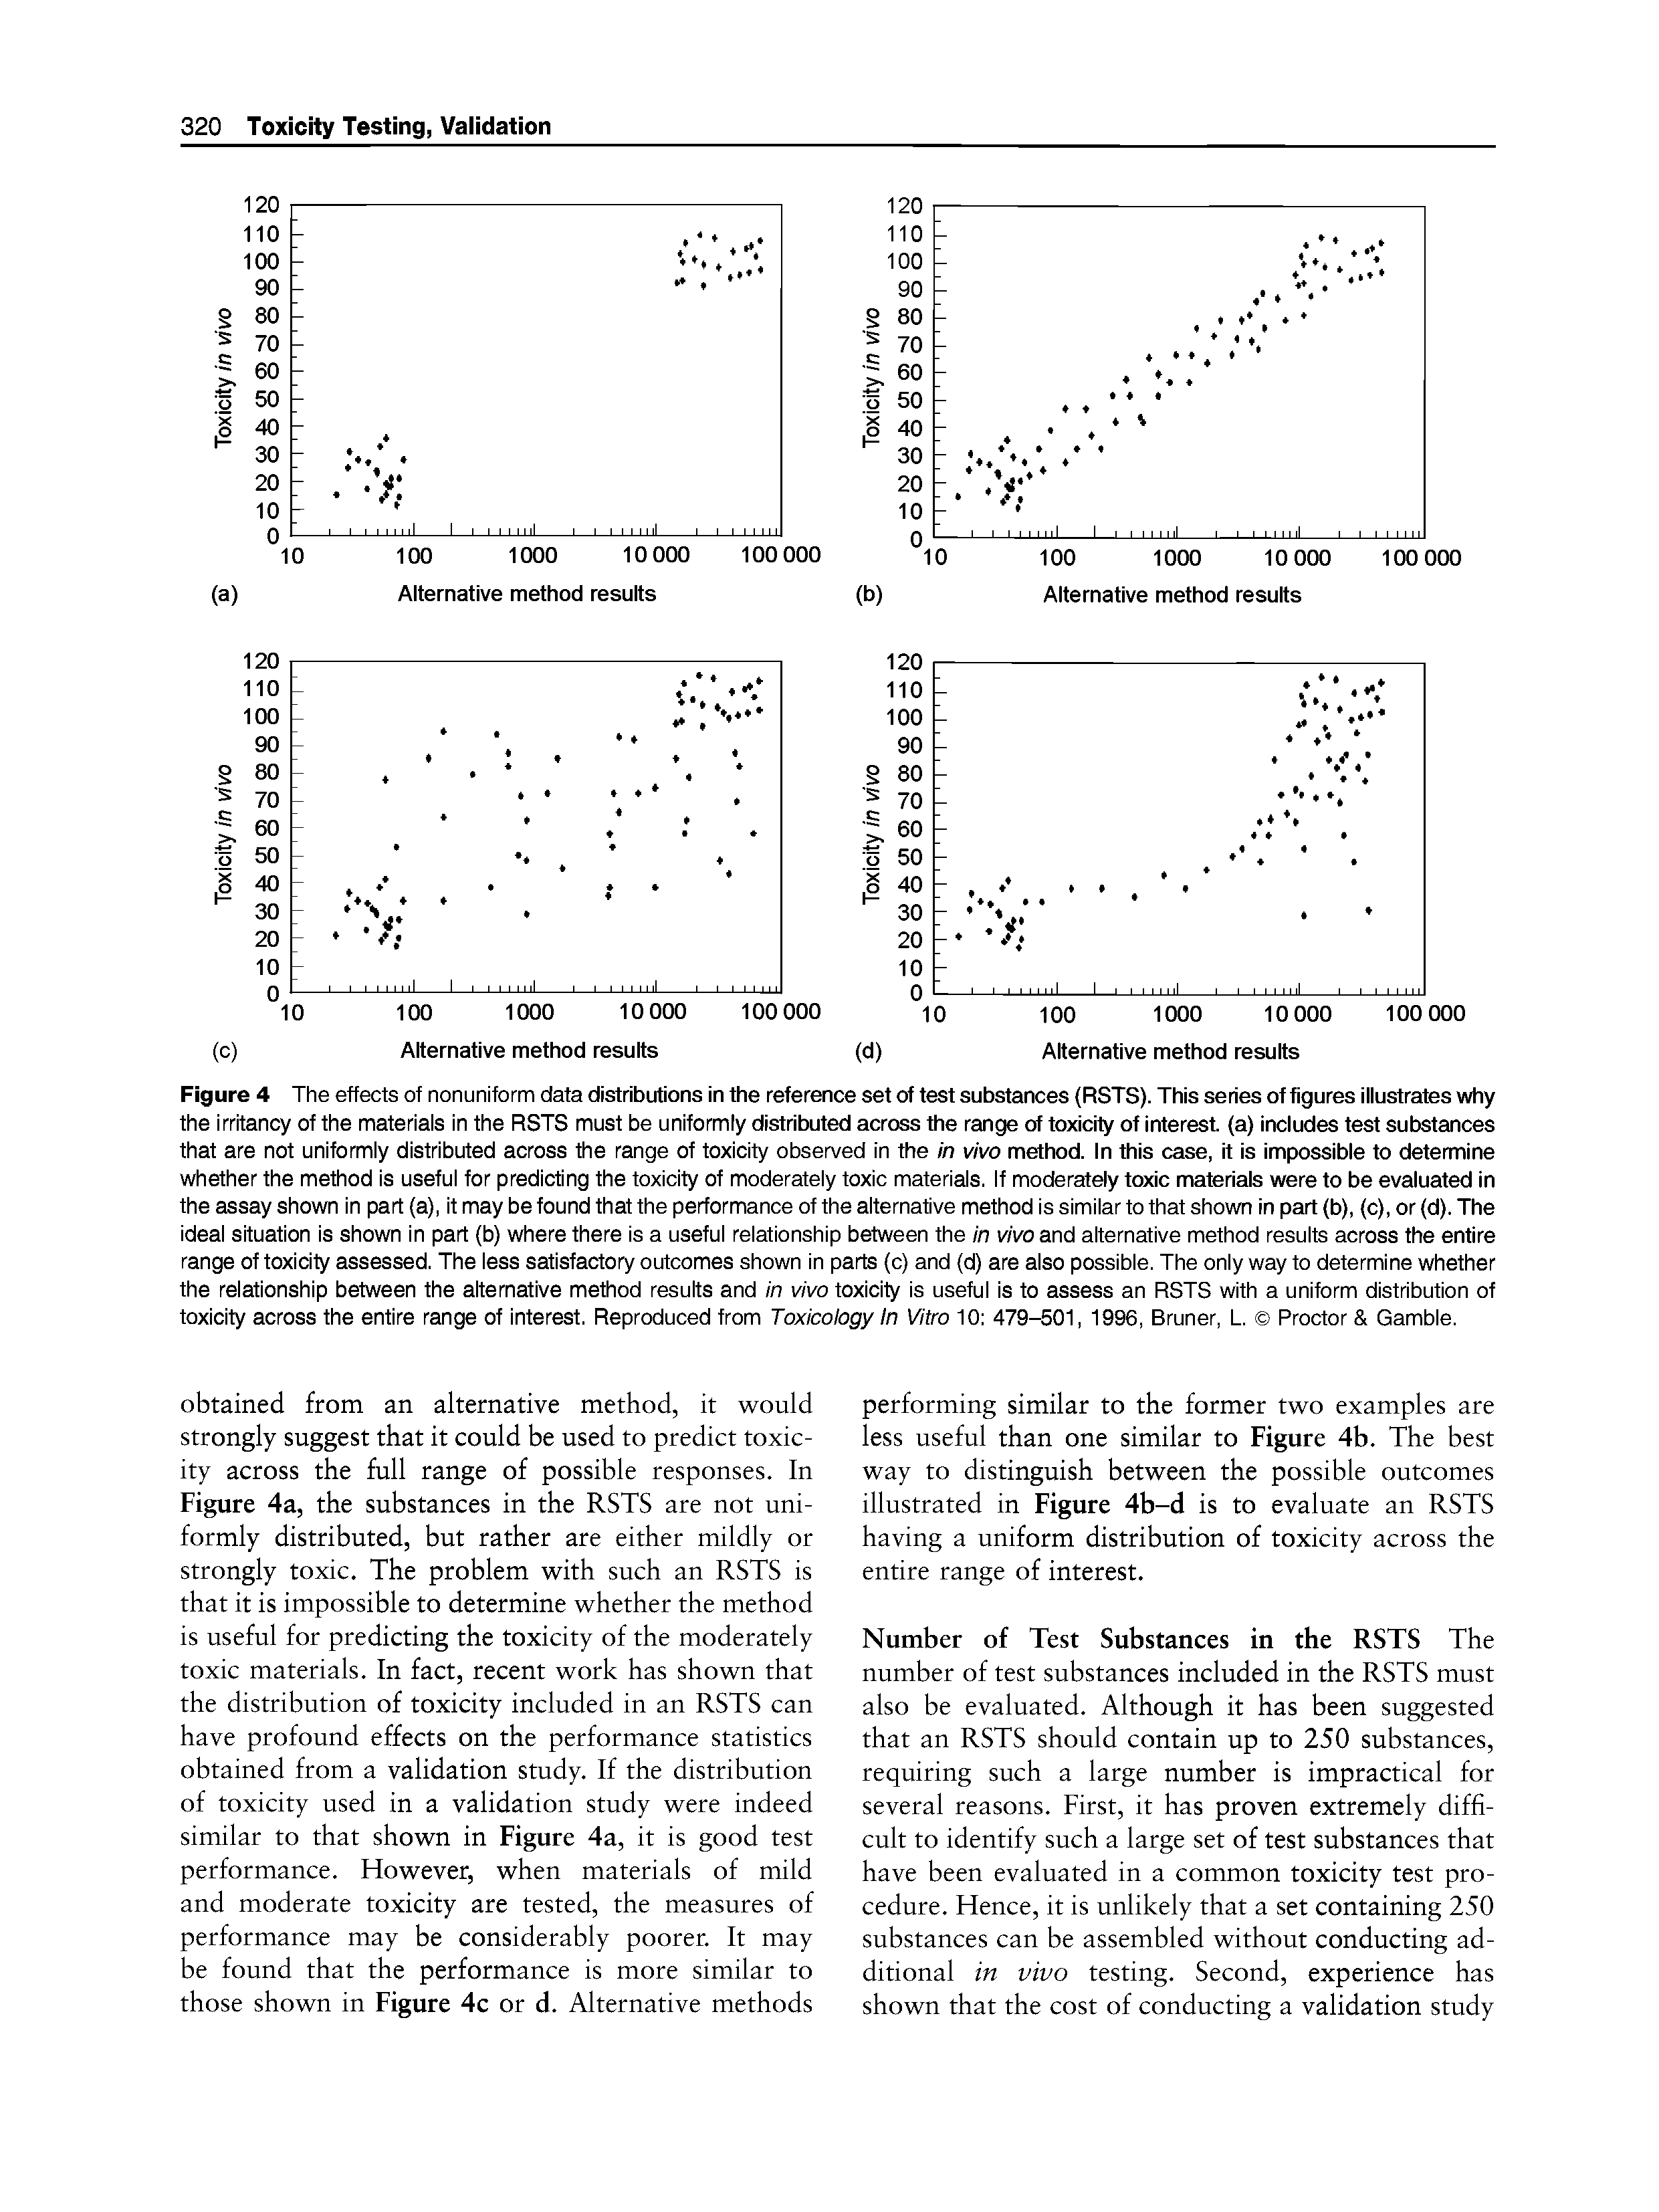 Figure 4 The effects of nonuniform data distributions in the reference set of test substances (RSTS). This series of figures illustrates why the irritancy of the materials in the RSTS must be uniformly distributed across the range of toxicity of interest, (a) includes test substances that are not uniformly distributed across the range of toxicity observed in the in vivo method. In this case, it is impossible to determine whether the method is useful for predicting the toxicity of moderately toxic materials. If moderately toxic materials were to be evaluated in the assay shown in part (a), it may be found that the performance of the alternative method is similar to that shown in part (b), (c), or (d). The ideal situation is shown in part (b) where there is a useful relationship between the in vivo and alternative method results across the entire range of toxicity assessed. The less satisfactory outcomes shown in parts (c) and (d) are also possible. The only way to determine whether the relationship between the alternative method results and in vivo toxicity is useful is to assess an RSTS with a uniform distribution of toxicity across the entire range of interest. Reproduced from Toxicology In Vitro 10 479-501, 1996, Bruner, L. Proctor Gamble.